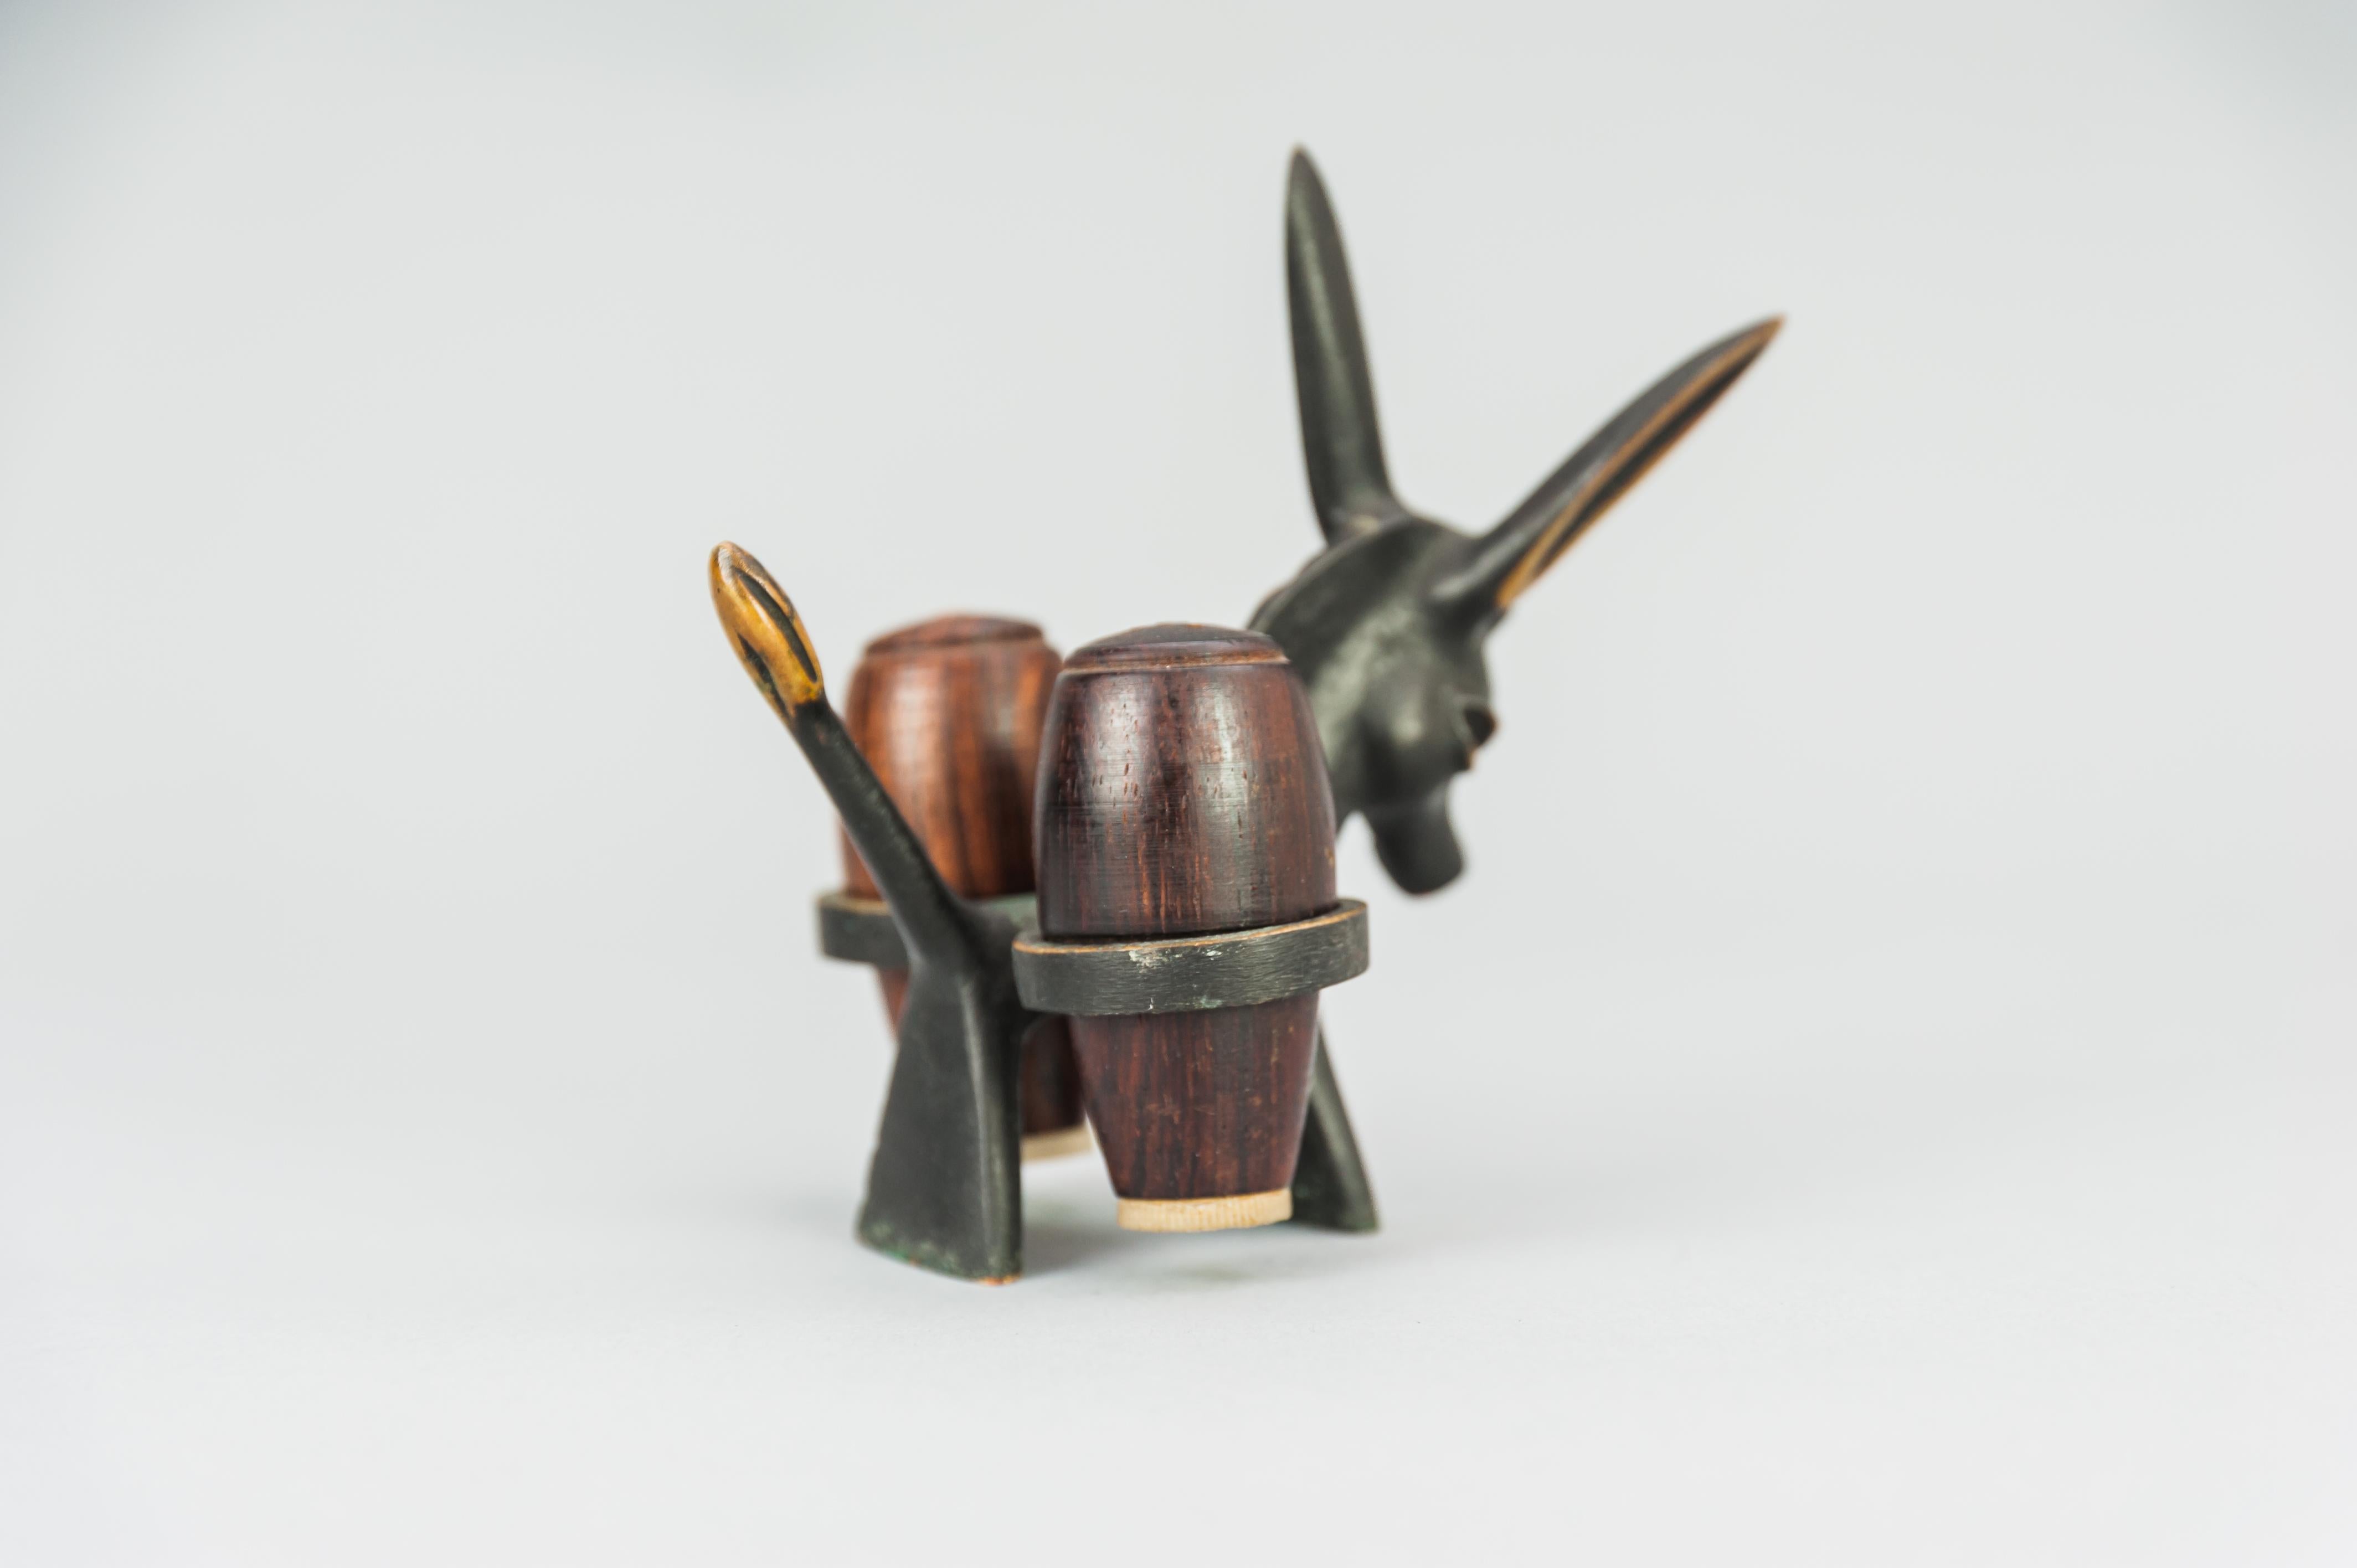 donkey salt and pepper shakers